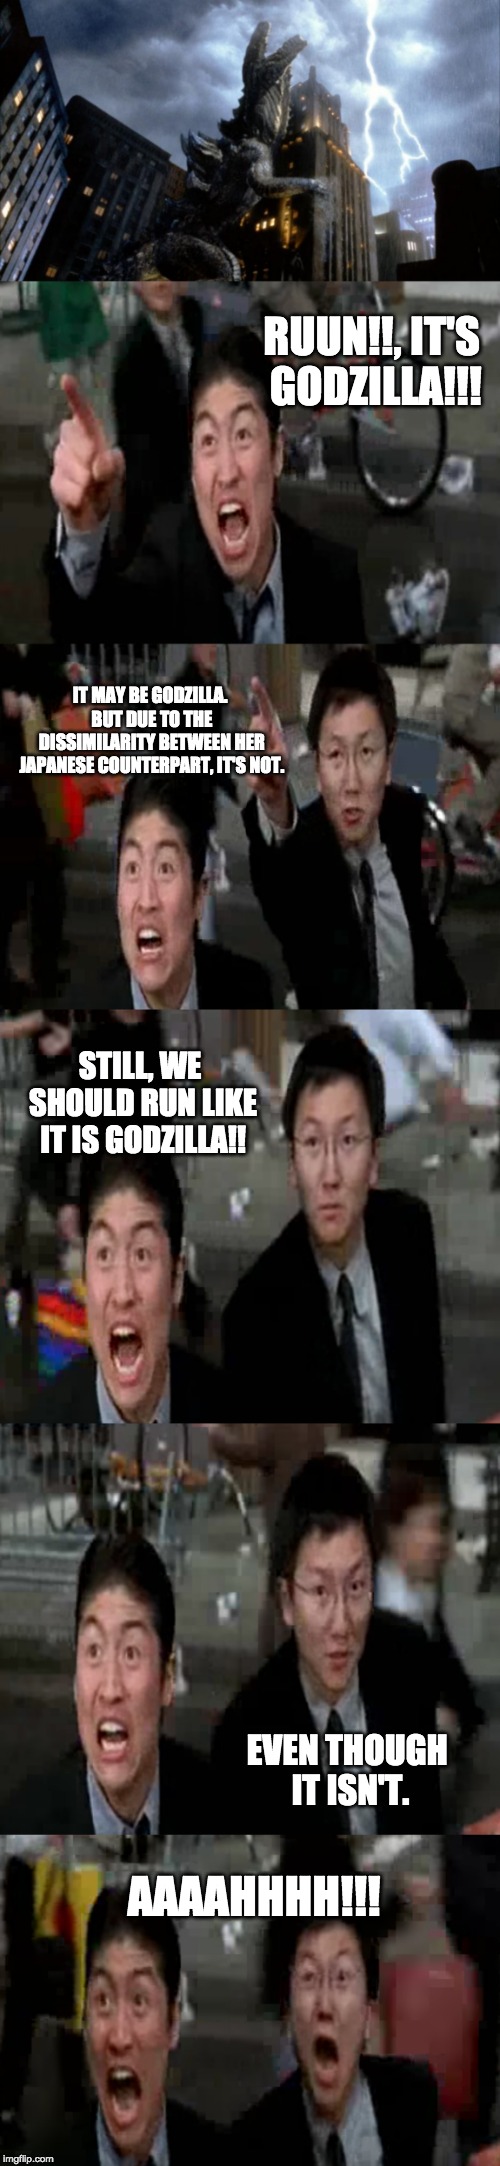 Everyone run!! it's the terrible American 'God'zilla!!! | RUUN!!, IT'S GODZILLA!!! IT MAY BE GODZILLA. BUT DUE TO THE DISSIMILARITY BETWEEN HER JAPANESE COUNTERPART, IT'S NOT. STILL, WE SHOULD RUN LIKE IT IS GODZILLA!! AAAAHHHH!!! EVEN THOUGH IT ISN'T. | image tagged in original meme,godzilla,austin powers,memes,japanese | made w/ Imgflip meme maker